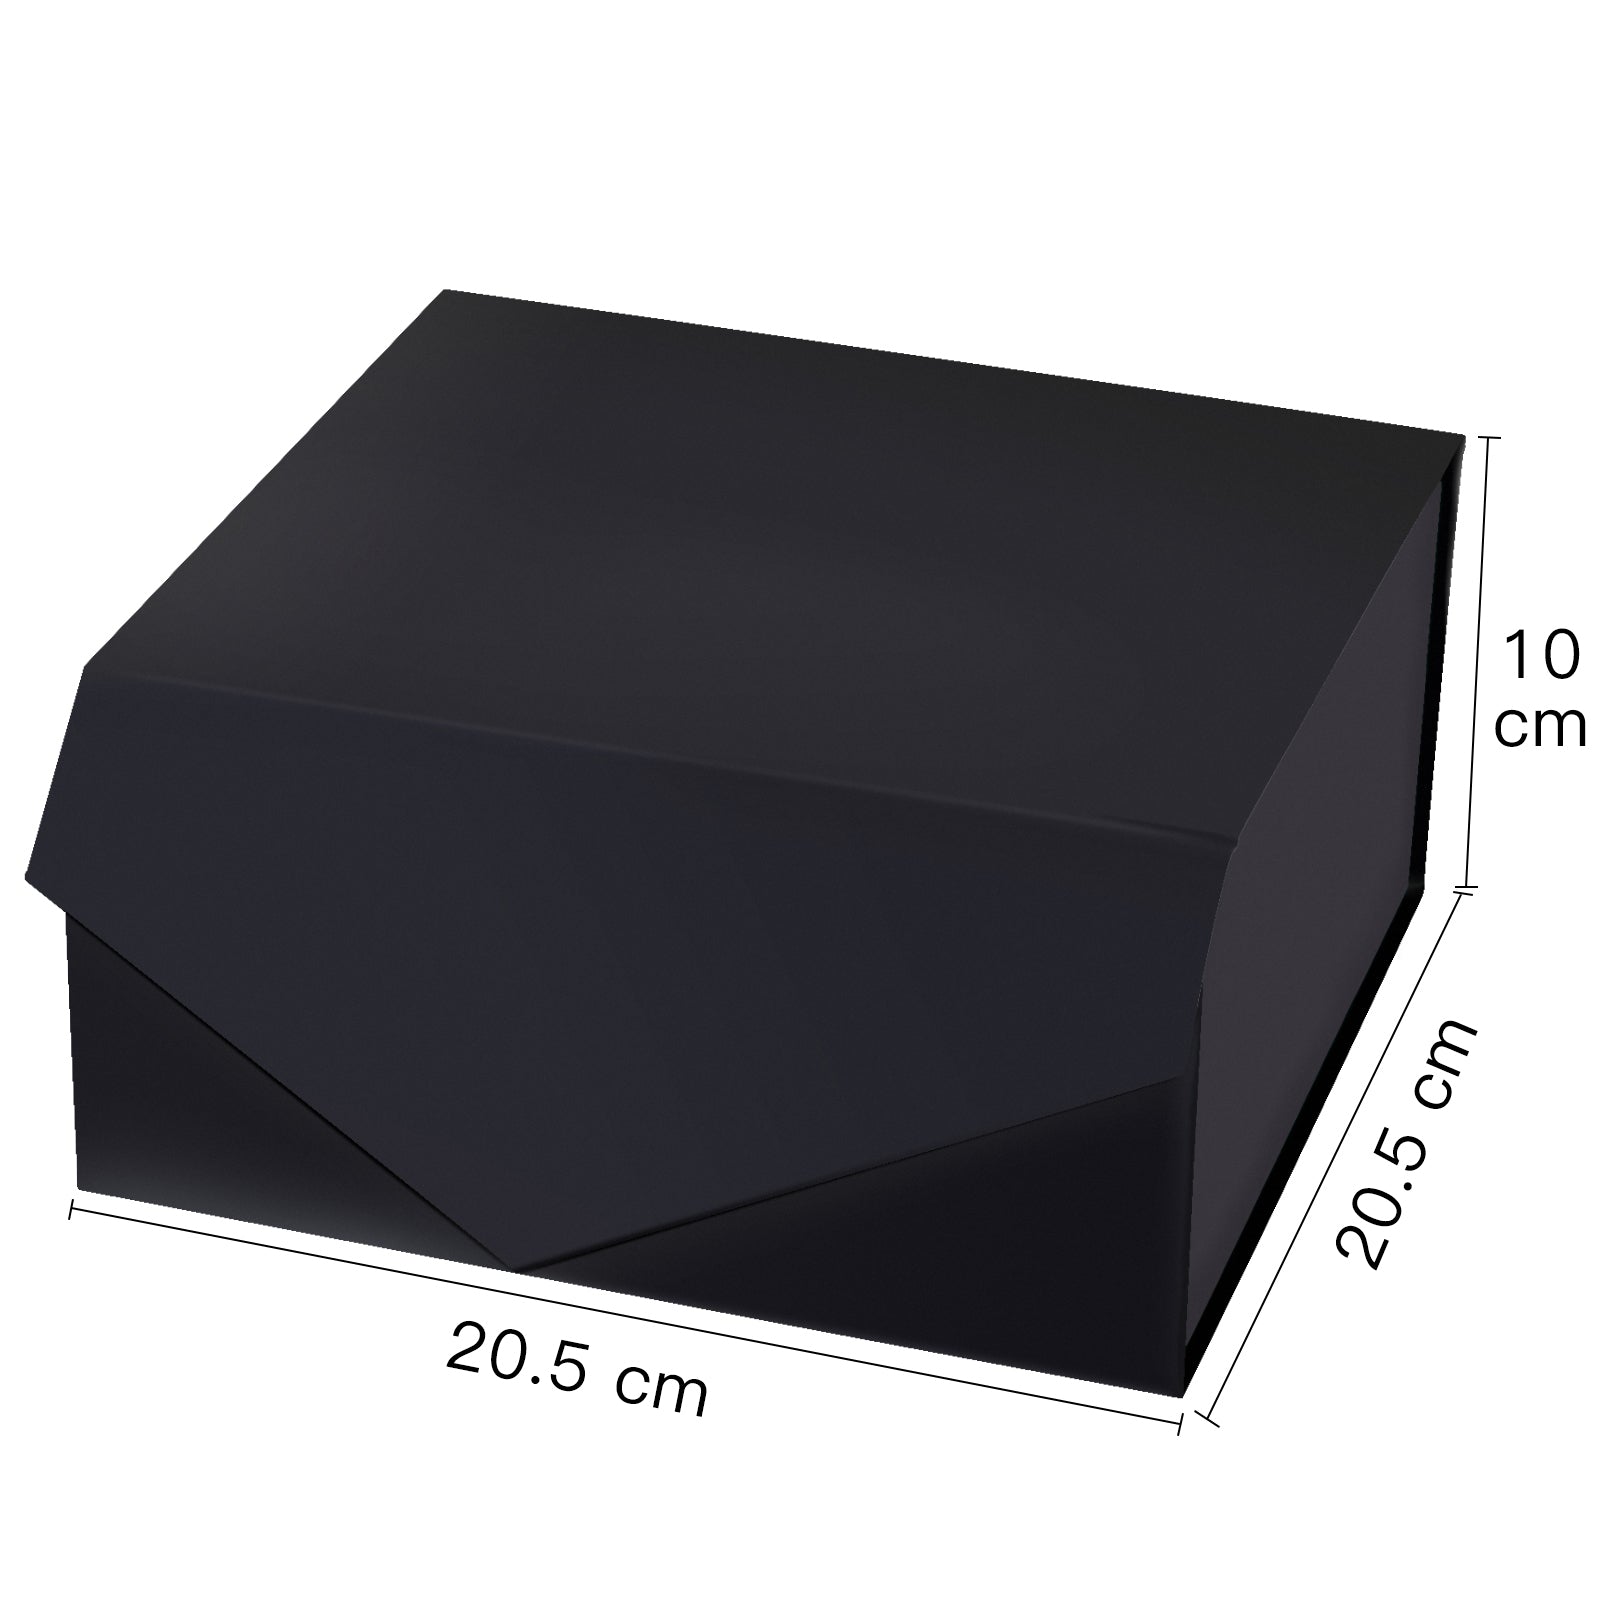 8x8x4 inch Collapsible Gift Box with Magnetic Closure